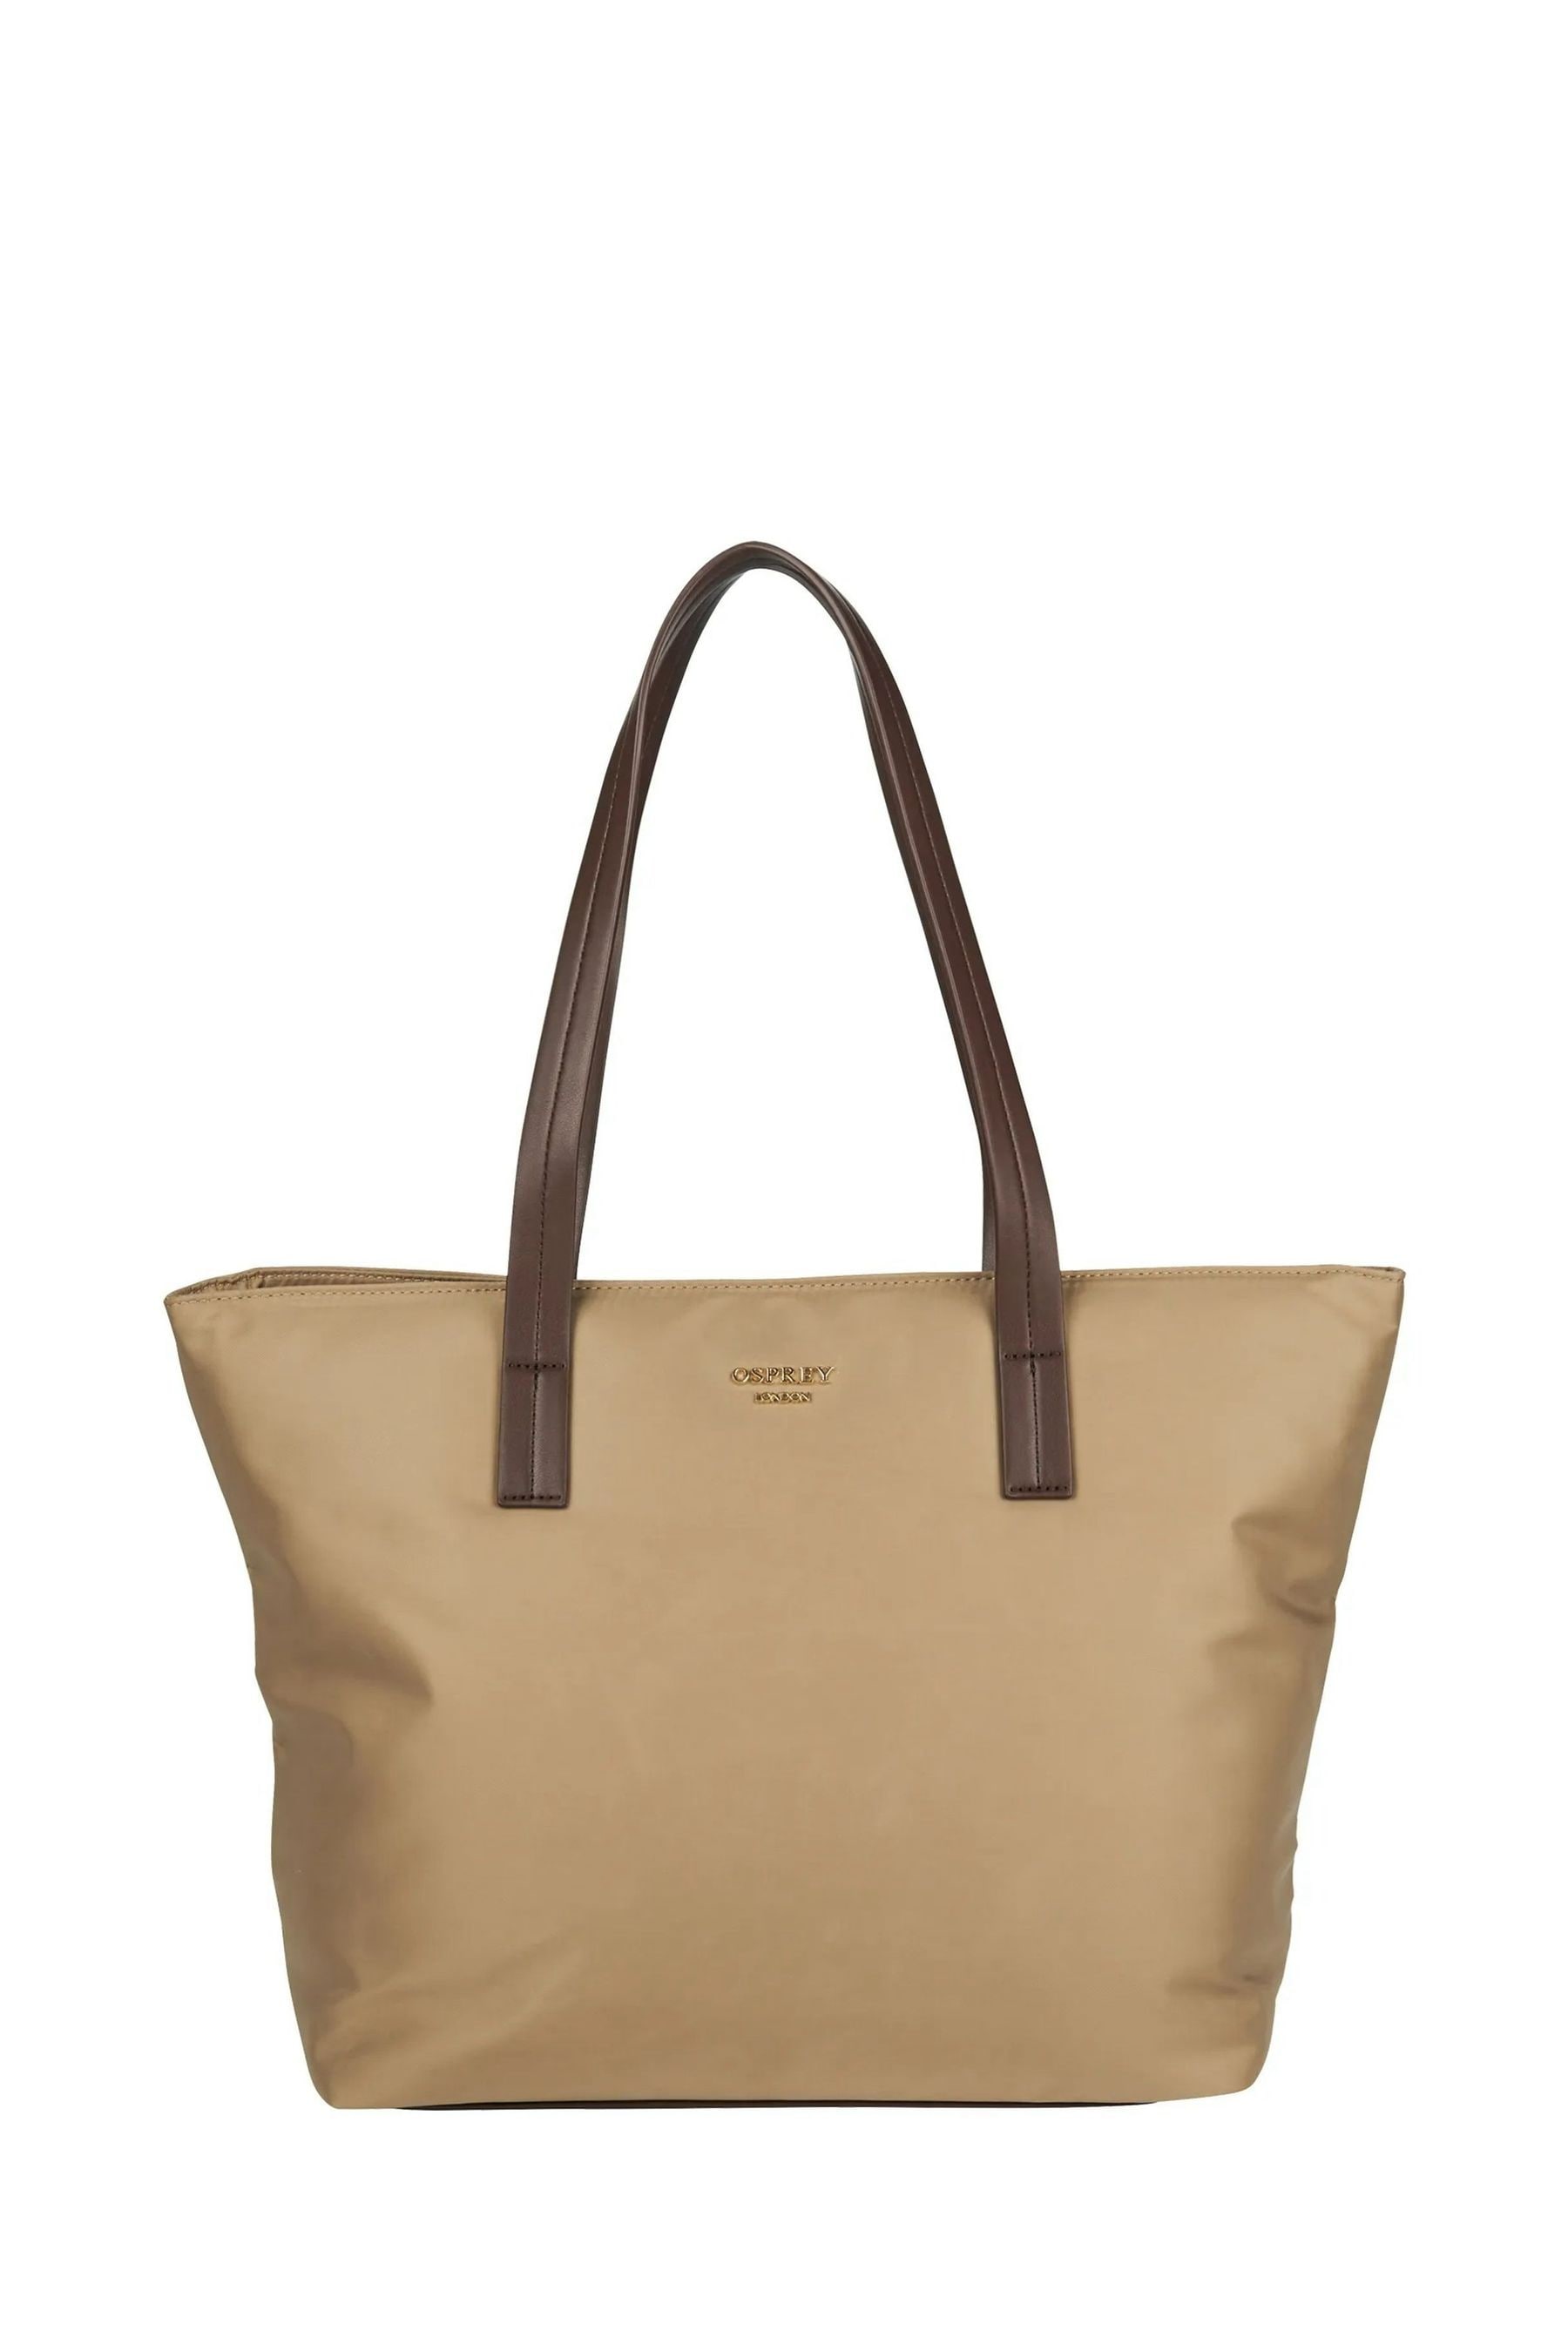 Buy OSPREY LONDON The Wanderer Nylon Tote Bag from the Next UK online shop